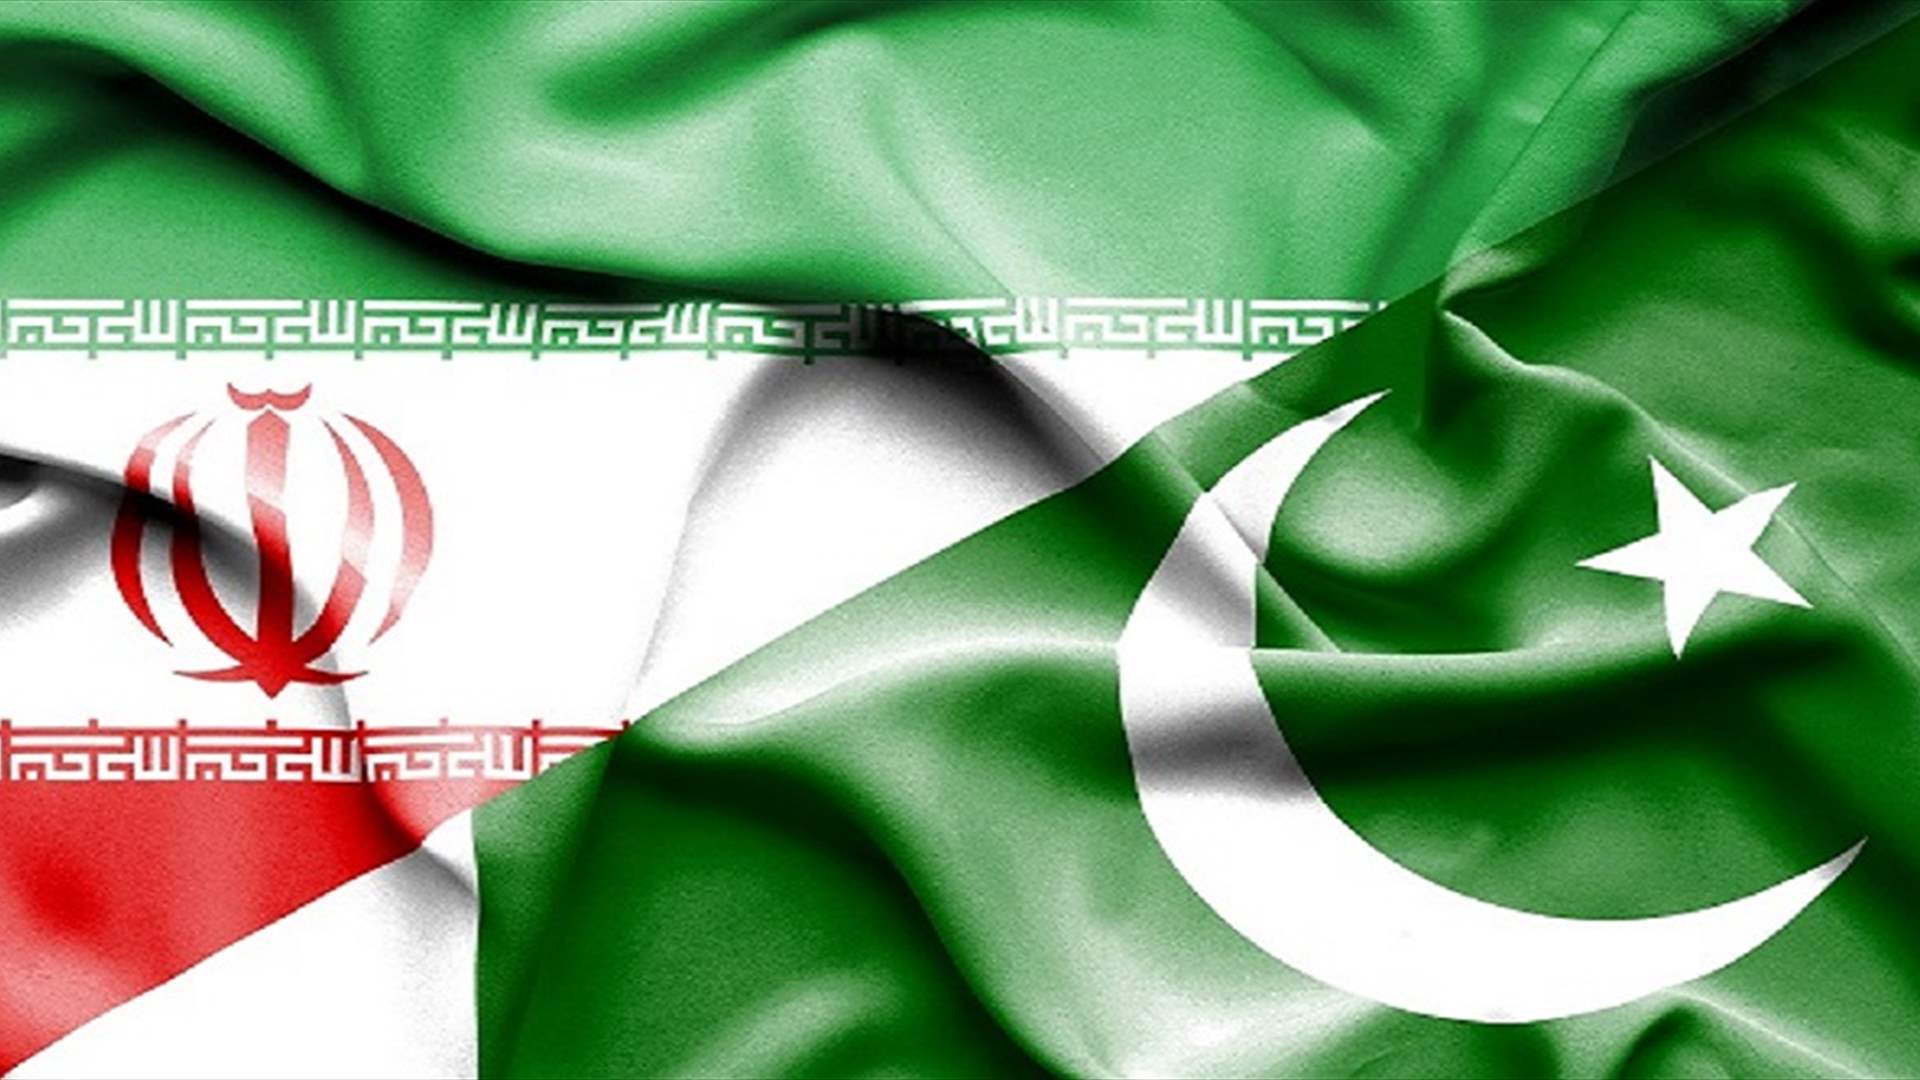 Iran-Pakistan Relations: From Historical Ties to Regional Tensions